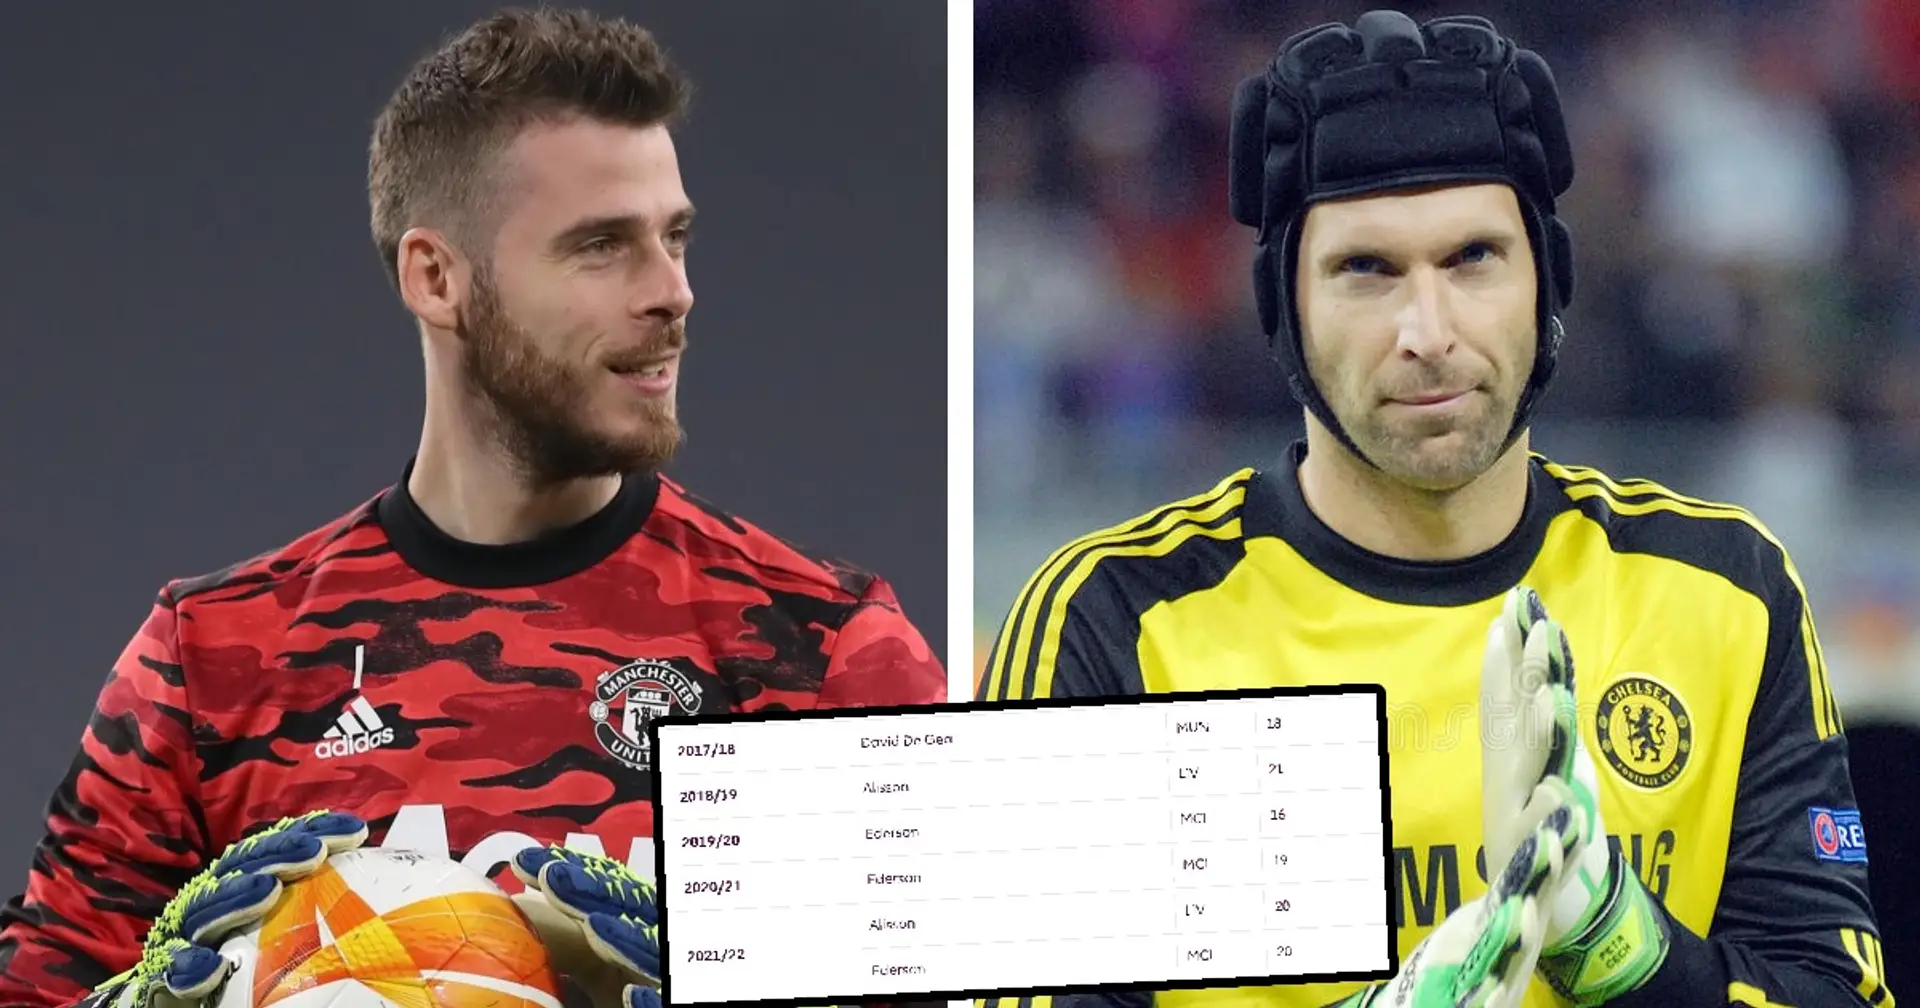 De Gea tops Golden Glove list: How many more clean sheets does he need to break Cech's record? Answered